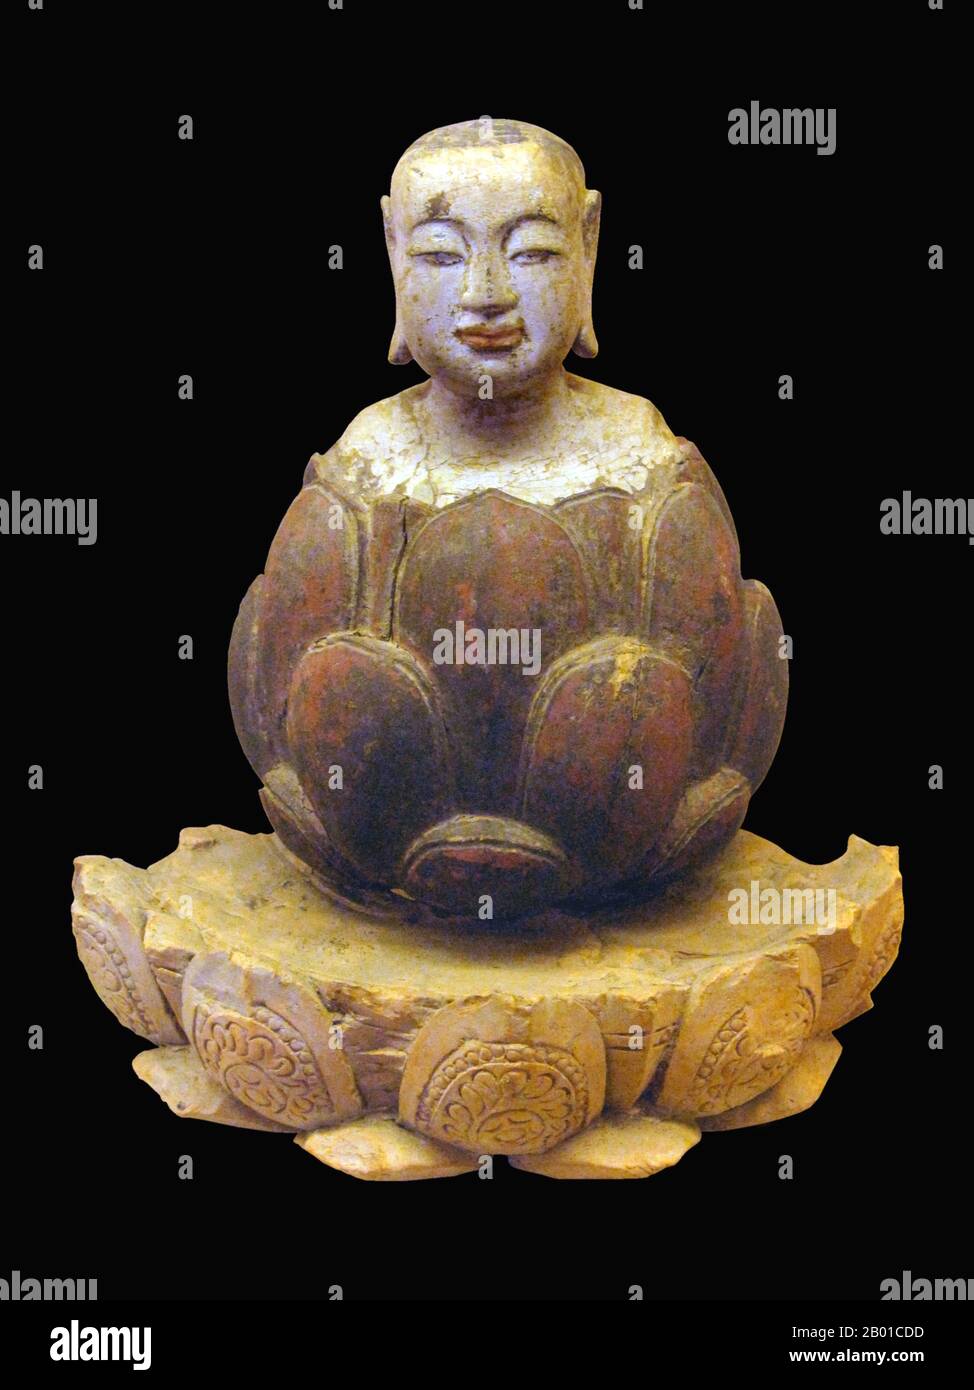 Vietnam: The boy Buddha rising up from lotus. Crimson and gilded wood, Trần-Hồ Dynasty, 14th-15th century. Photo by Gryffindor - Jbarta (CC BY-SA 3.0 License).  In Buddhism, in the Anguttara Nikaya, the Buddha compares himself to a lotus, stating that the lotus flower rises from the muddy water unsullied, free from the defilements taught in the specific sutta. Therefore the lotus symbolically represents purity of the body, speech and mind, floating beyond material attachment and physical desire.  Lotus thrones are the normal pedestal for most important Buddhist figures in art. Stock Photo